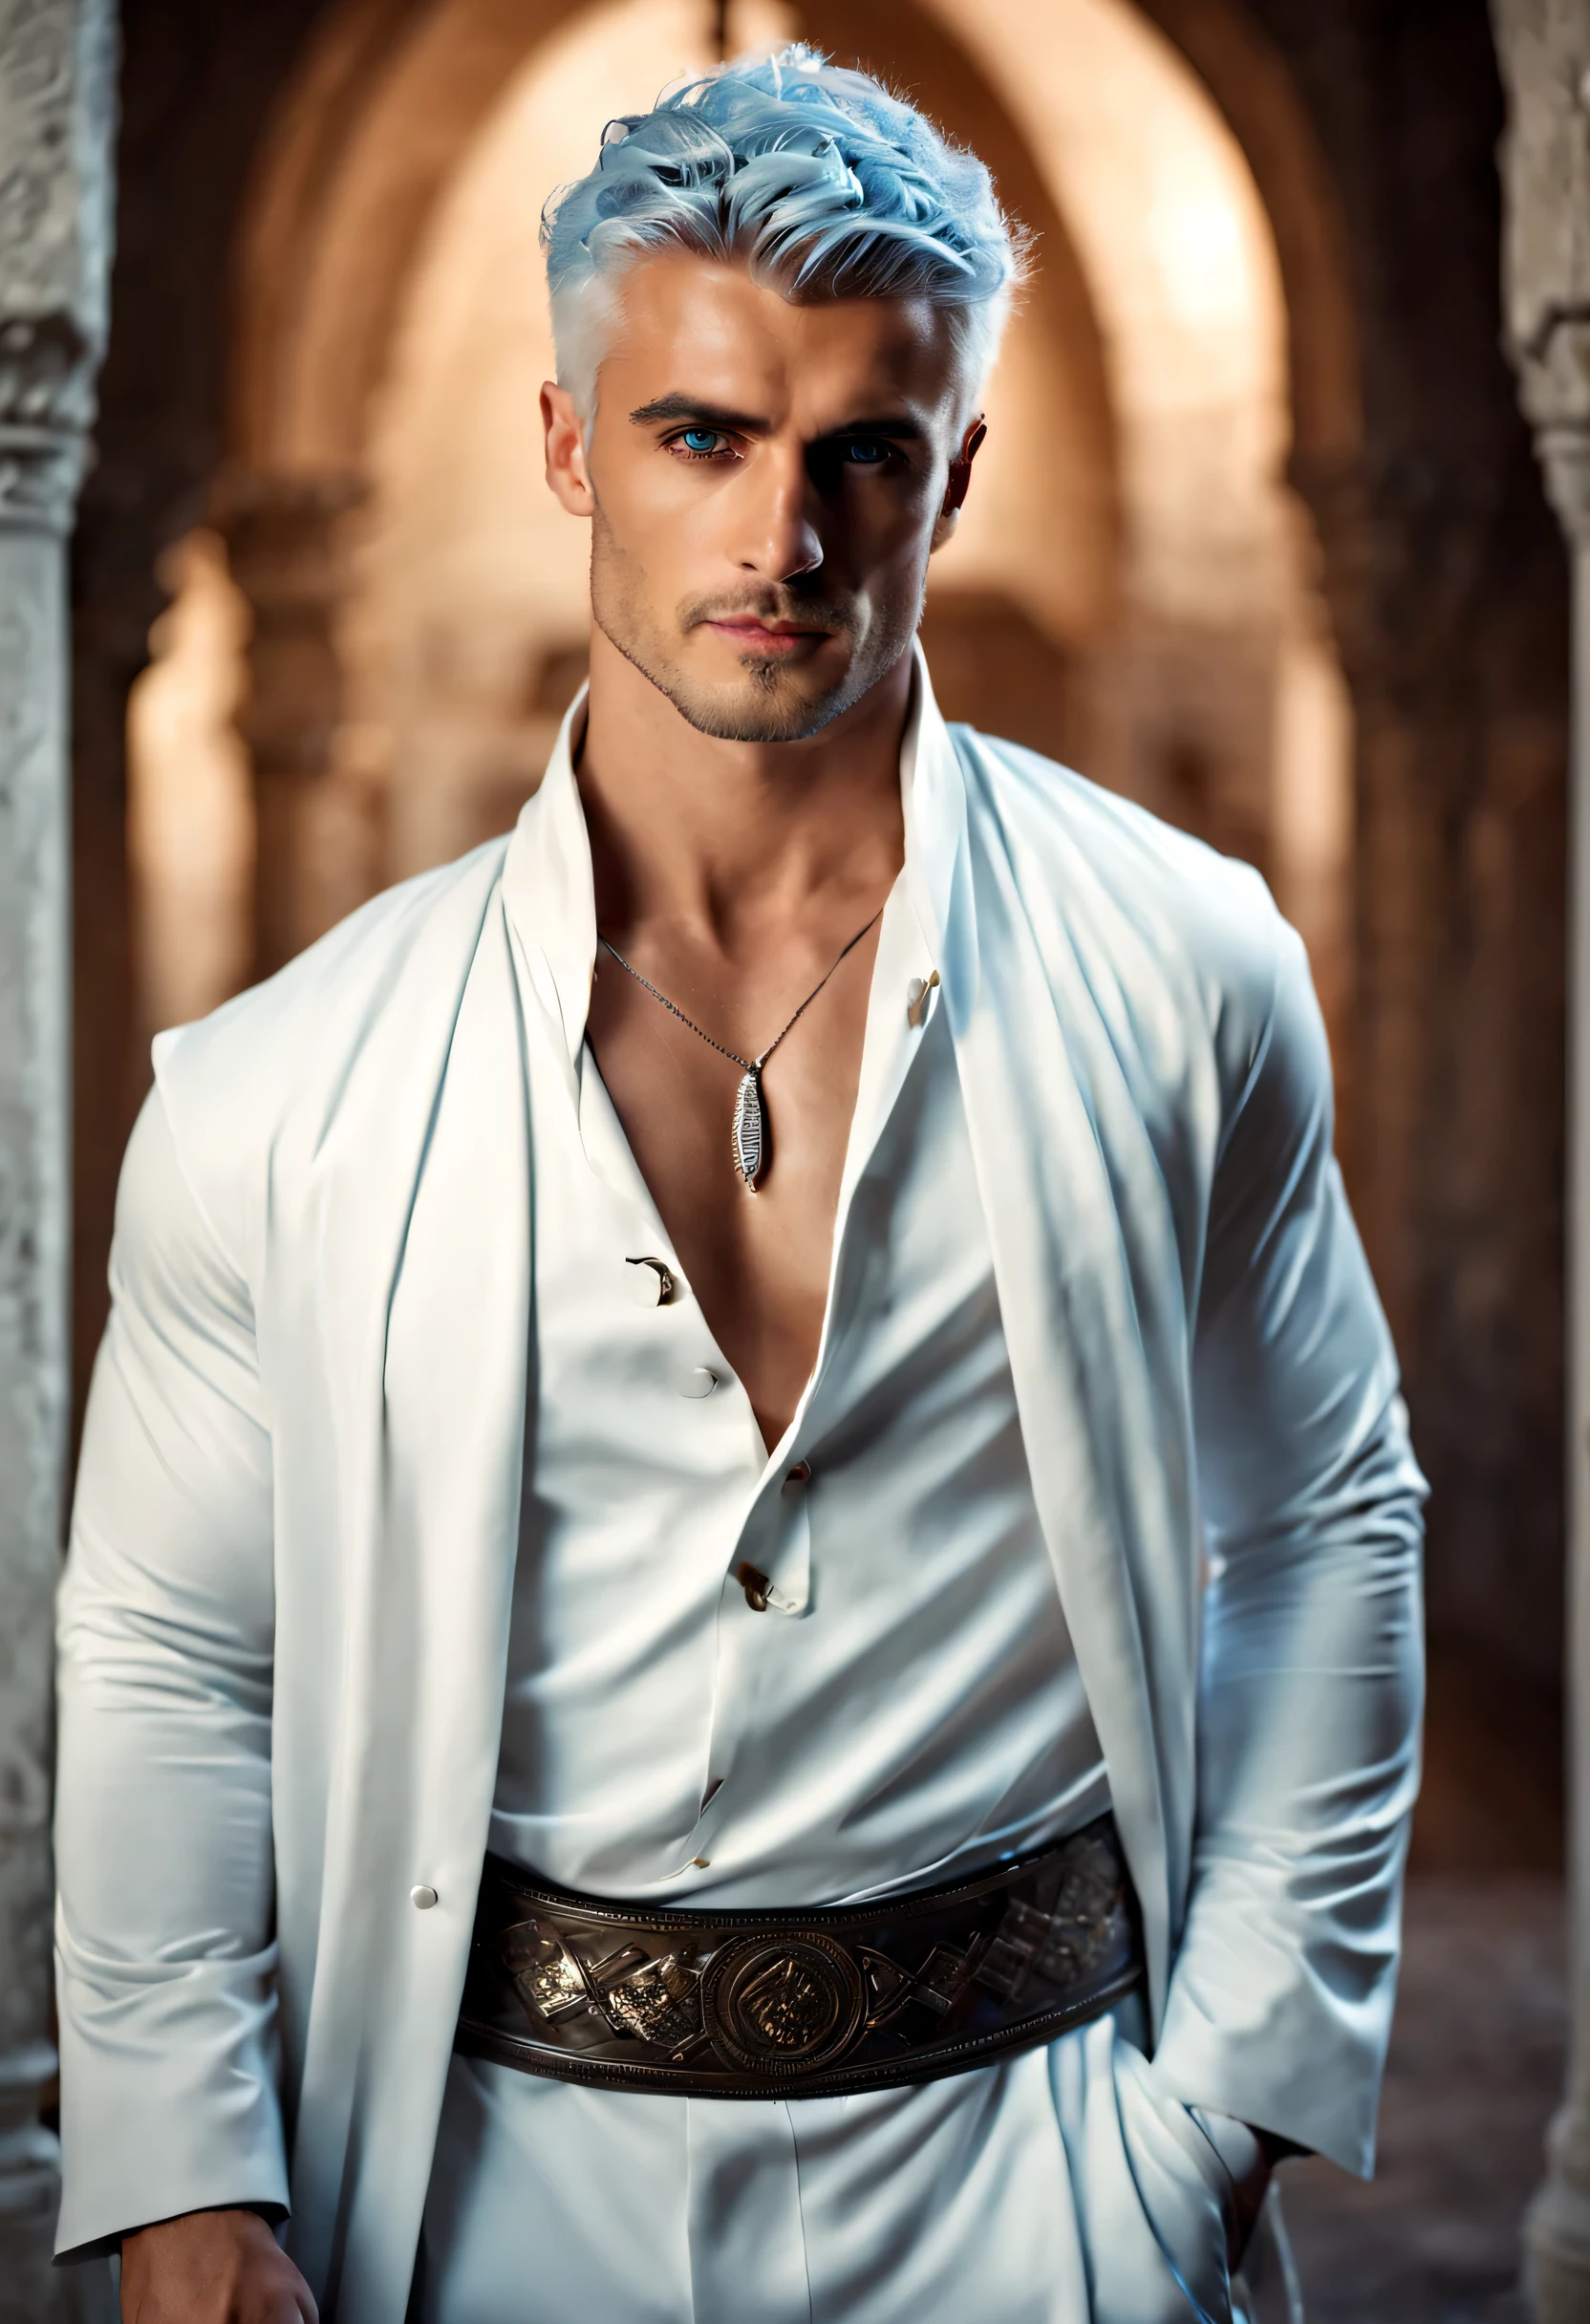 Elegant man, strong physique, white robe, white colored Arabian pants, light blue noble blouse, white boots, messy light blue hair, look of satisfaction, short hair, dark blue colored eyes, noble appearance, holding a silver spear, ancient castle, medieval setting.